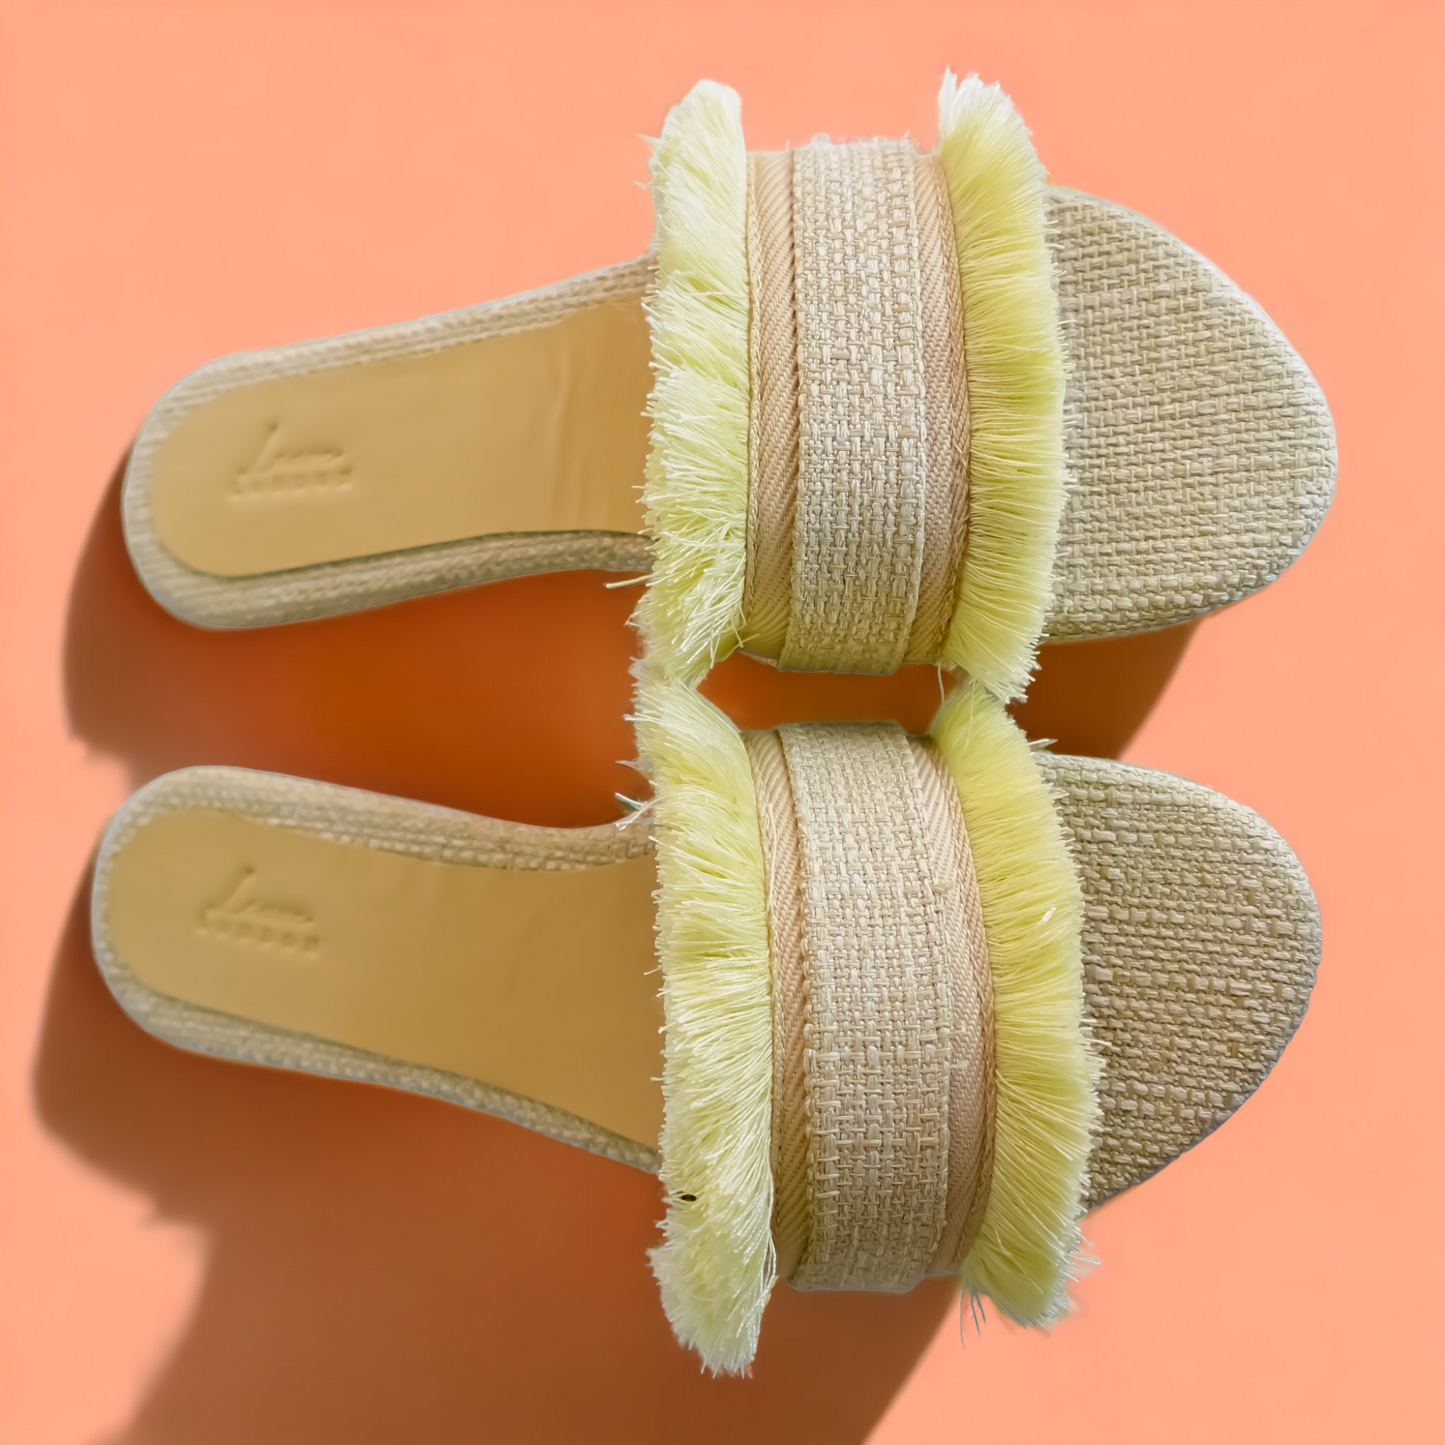 Luxurious Cream Knitted Slippers with Ruffles